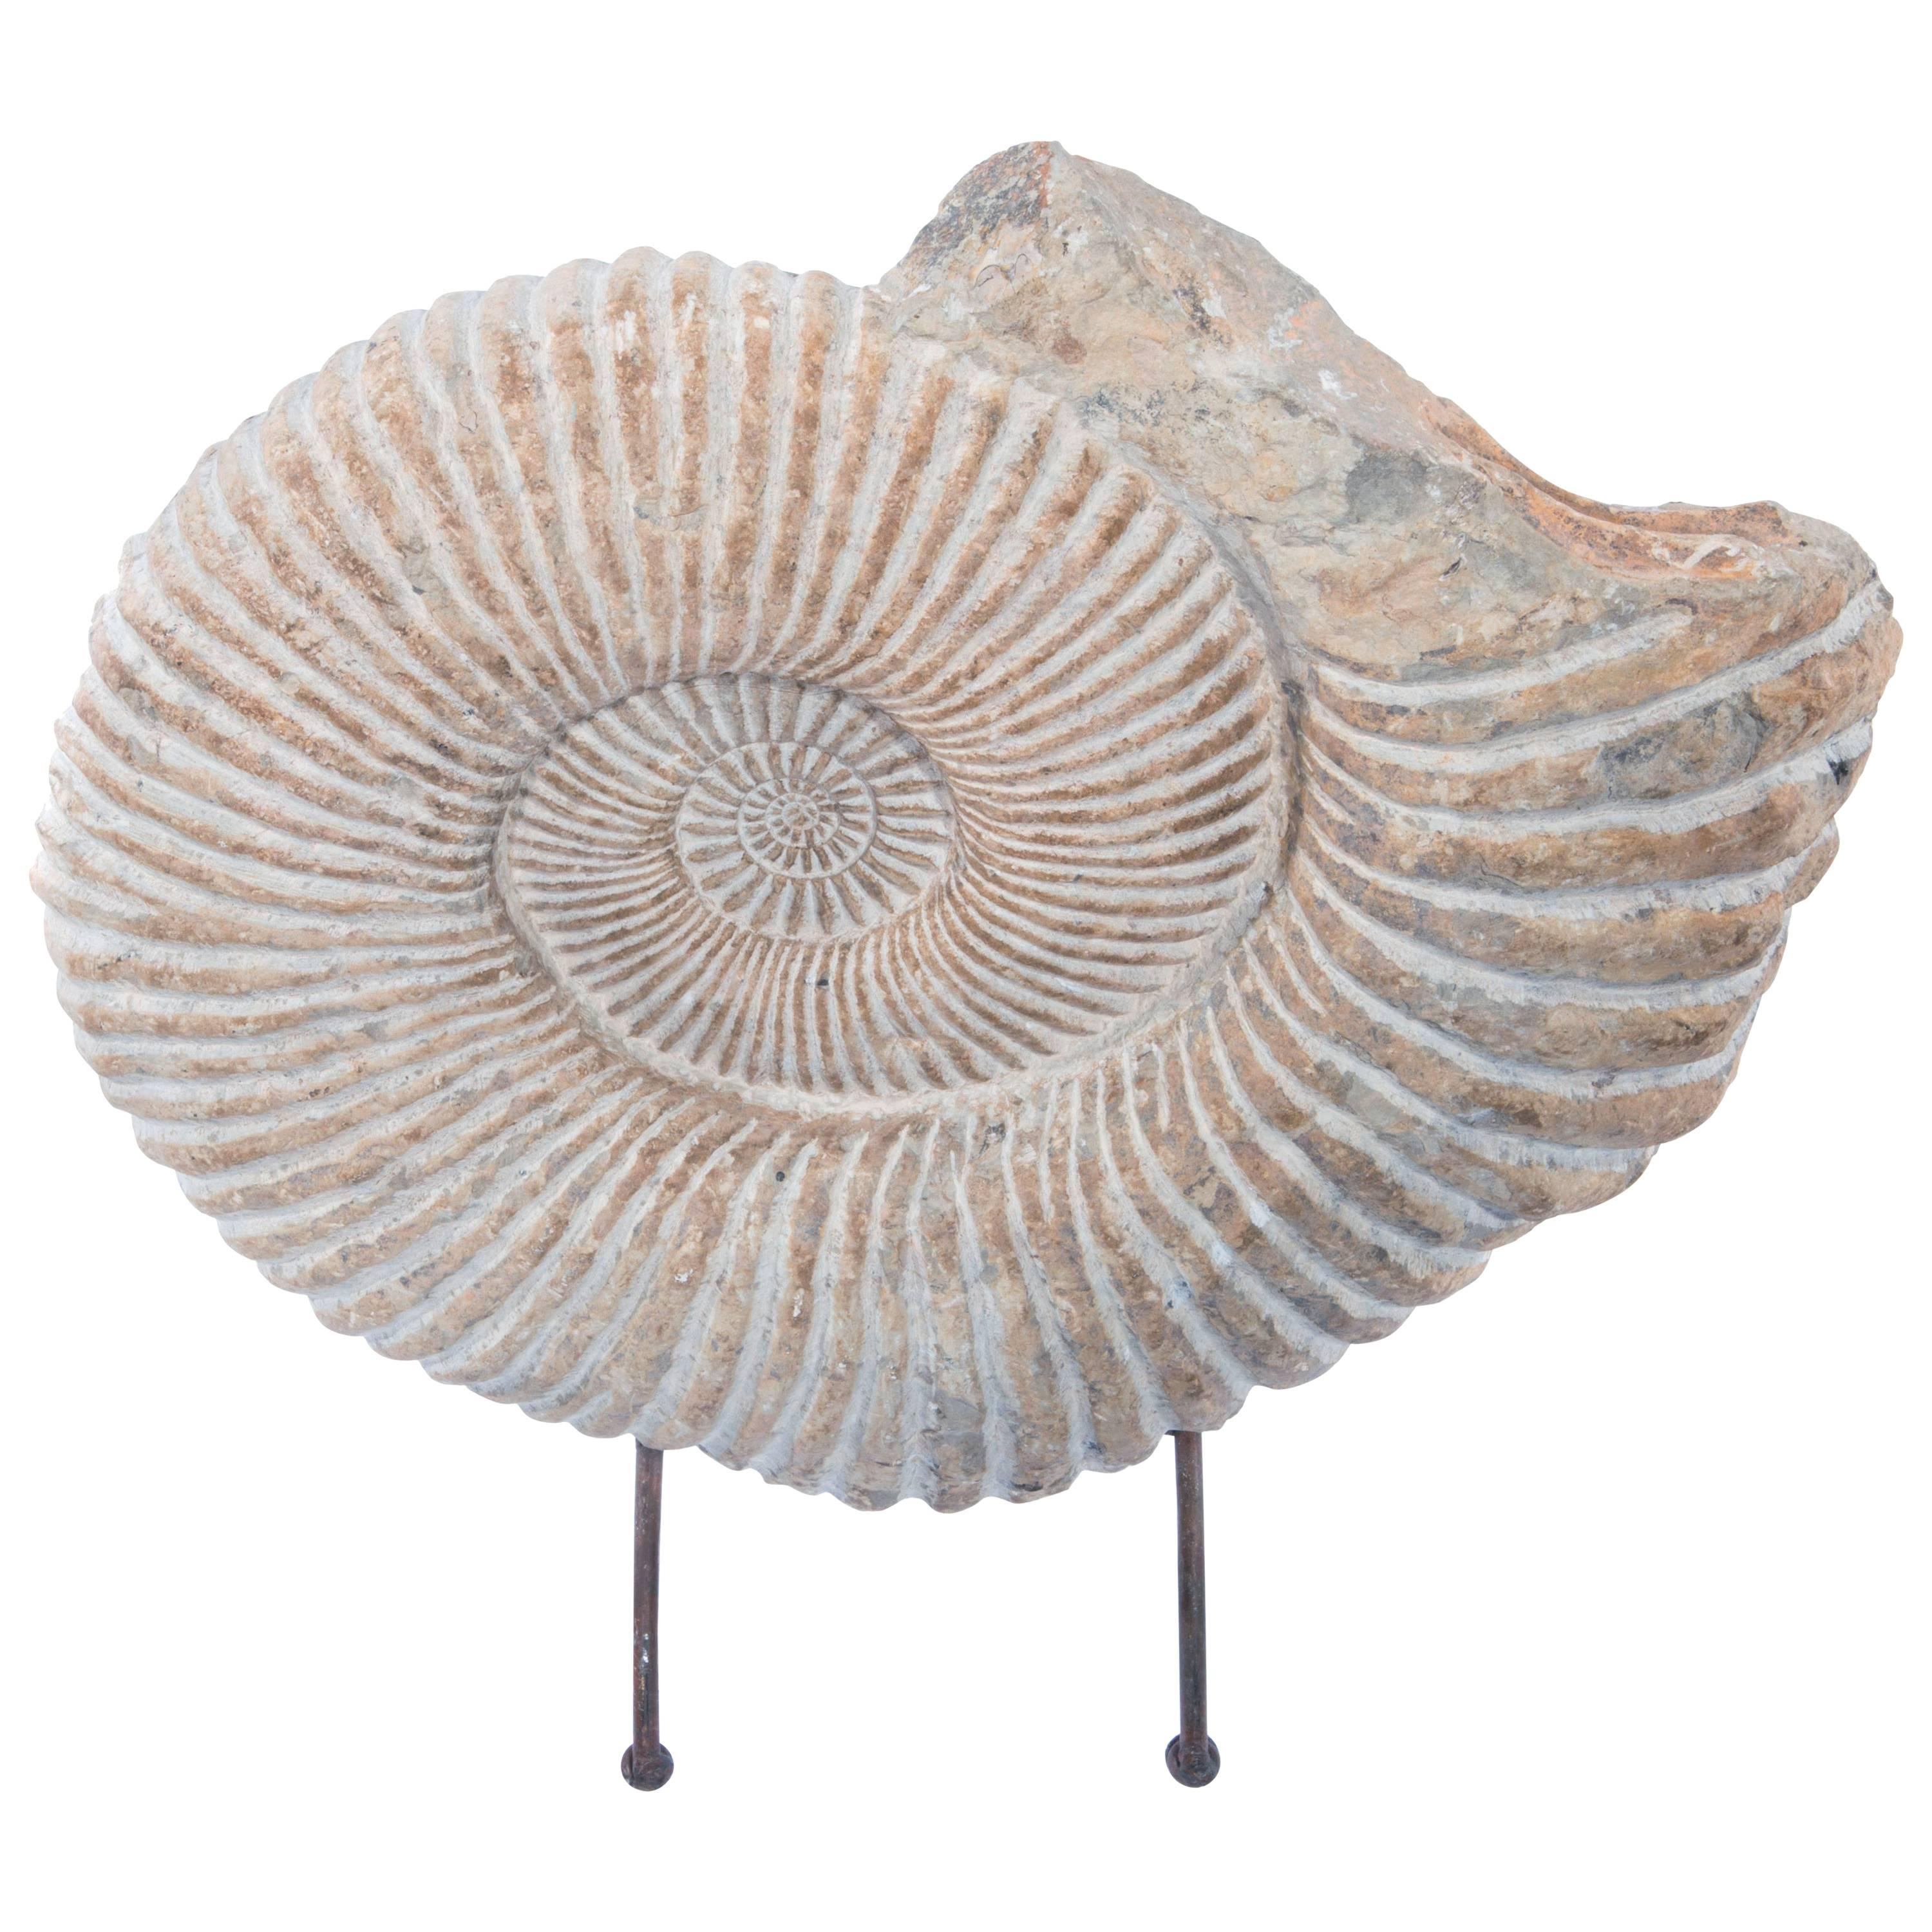 Large Ammonite Fossil on Stand